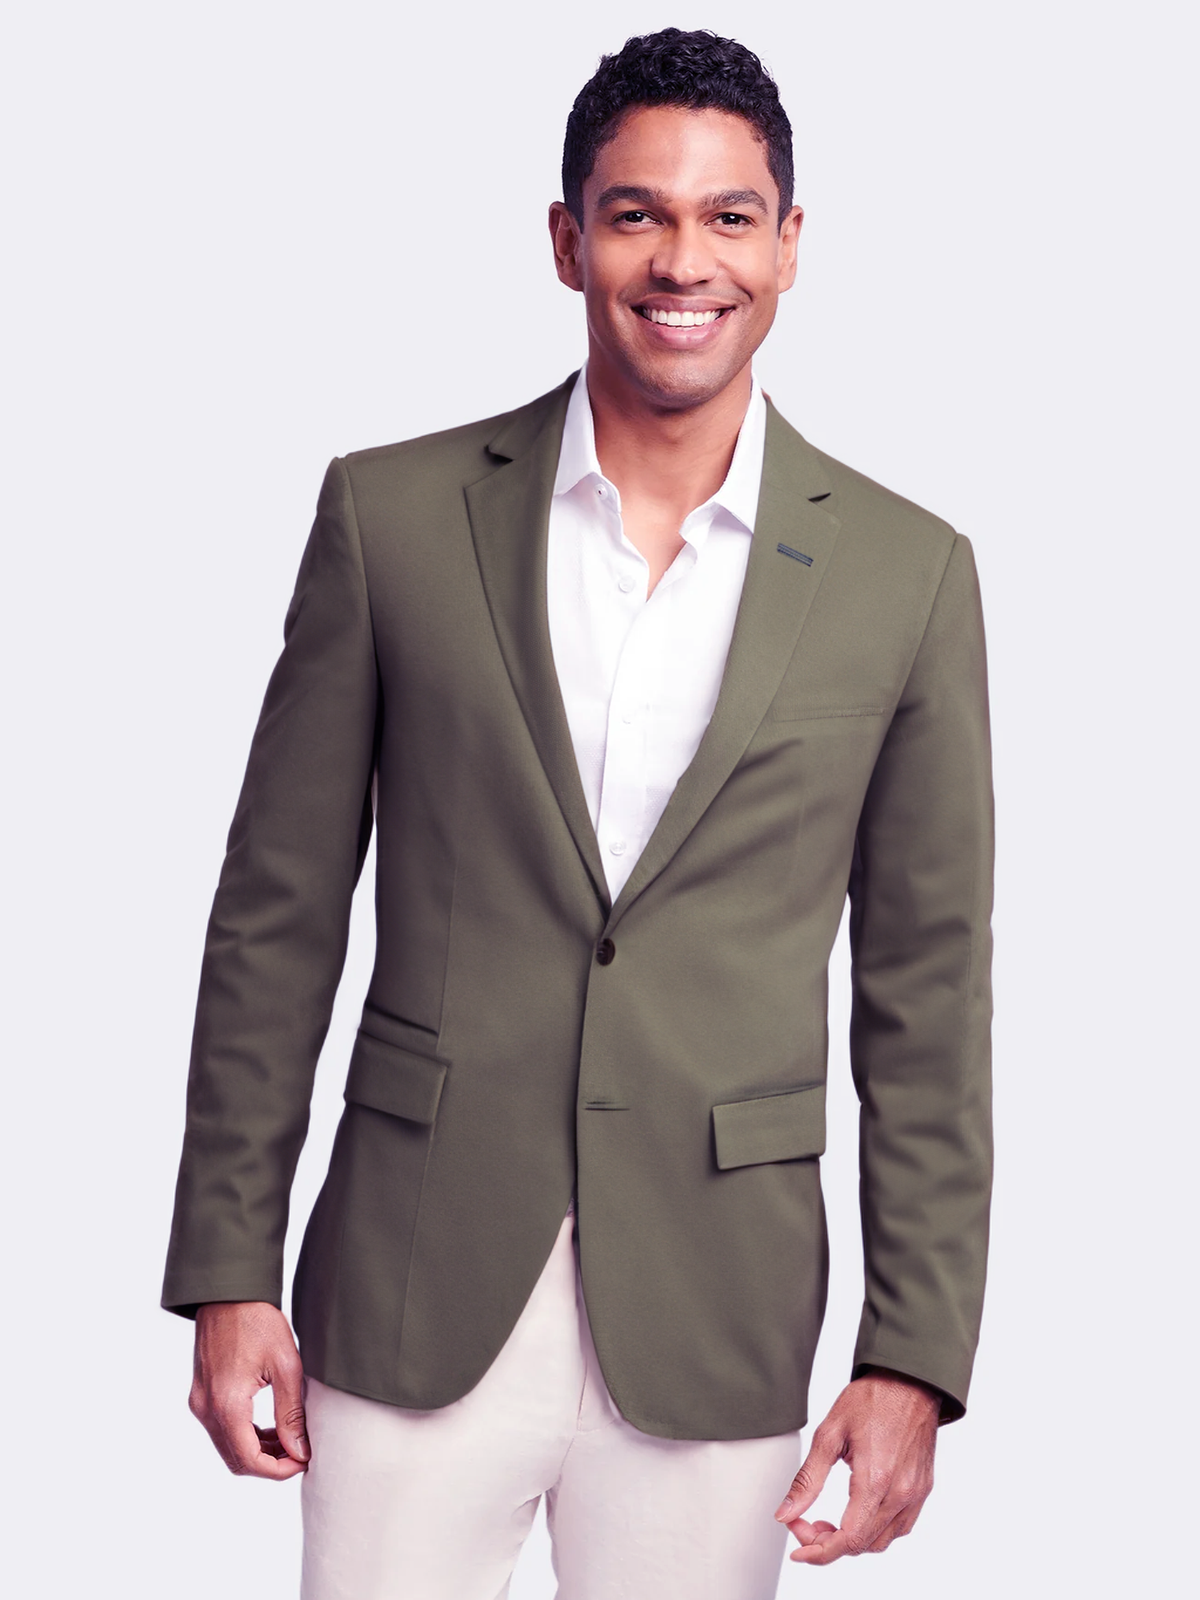 BFU950 Army Blazer  https://harrysformenswear.com.au/products/bfu950-army-blazer  Brookfield Luxe Blazers are expertly crafted with top notch fabrics and construction. This style is modern and sleek with an extra hint of luxury, so you can be sure you'll look sharp in any situation. Our tailored fits are designed to help you look like the professional man you are. Features: Modern fit, Easy Care, 10…